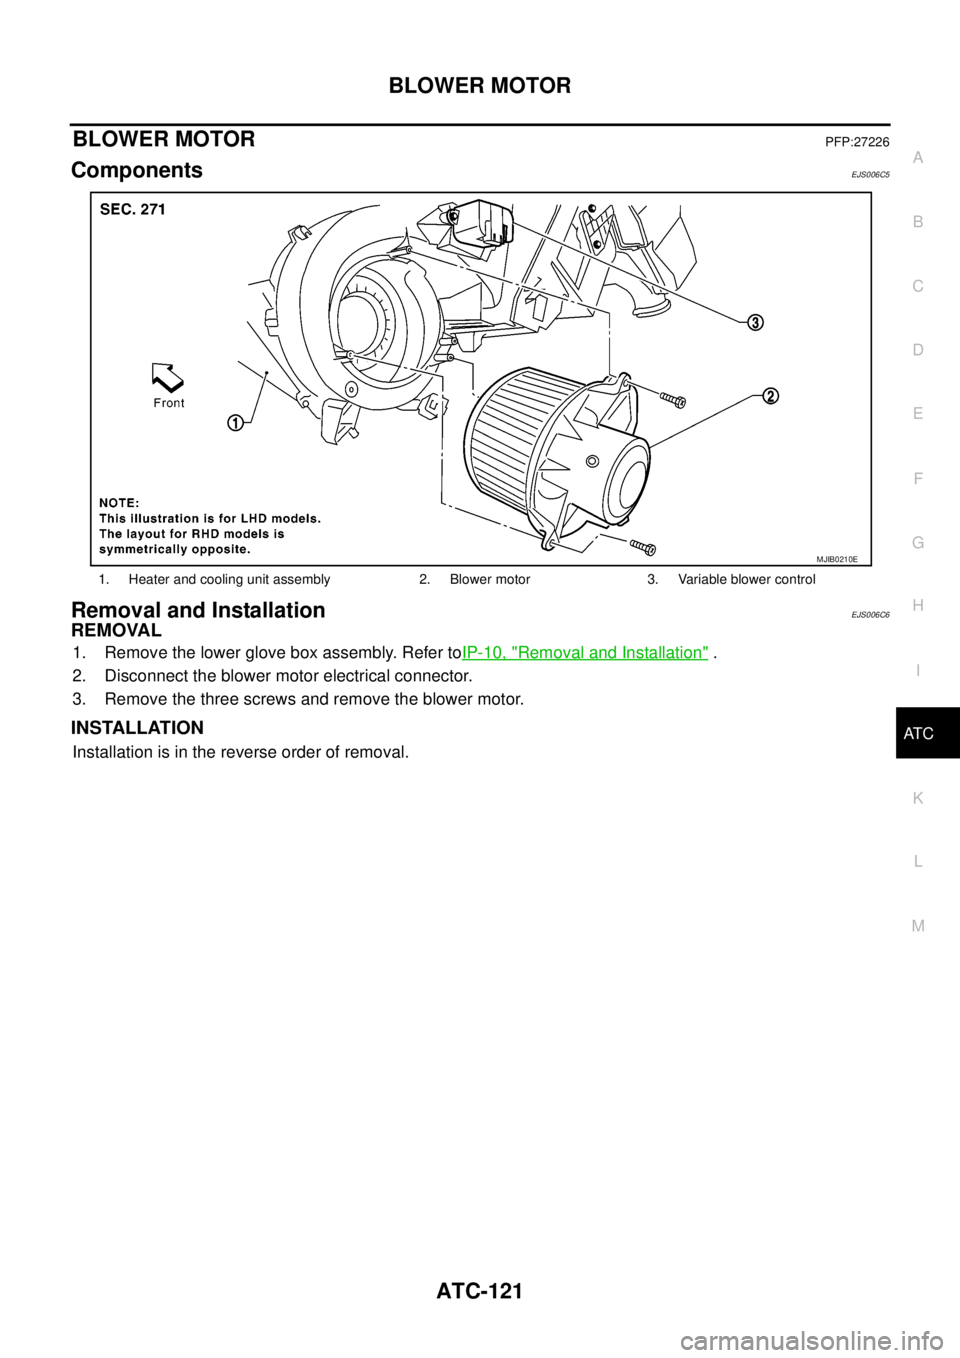 NISSAN NAVARA 2005  Repair Workshop Manual BLOWER MOTOR
ATC-121
C
D
E
F
G
H
I
K
L
MA
B
AT C
BLOWER MOTORPFP:27226
ComponentsEJS006C5
Removal and InstallationEJS006C6
REMOVAL
1. Remove the lower glove box assembly. Refer toIP-10, "Removal and I